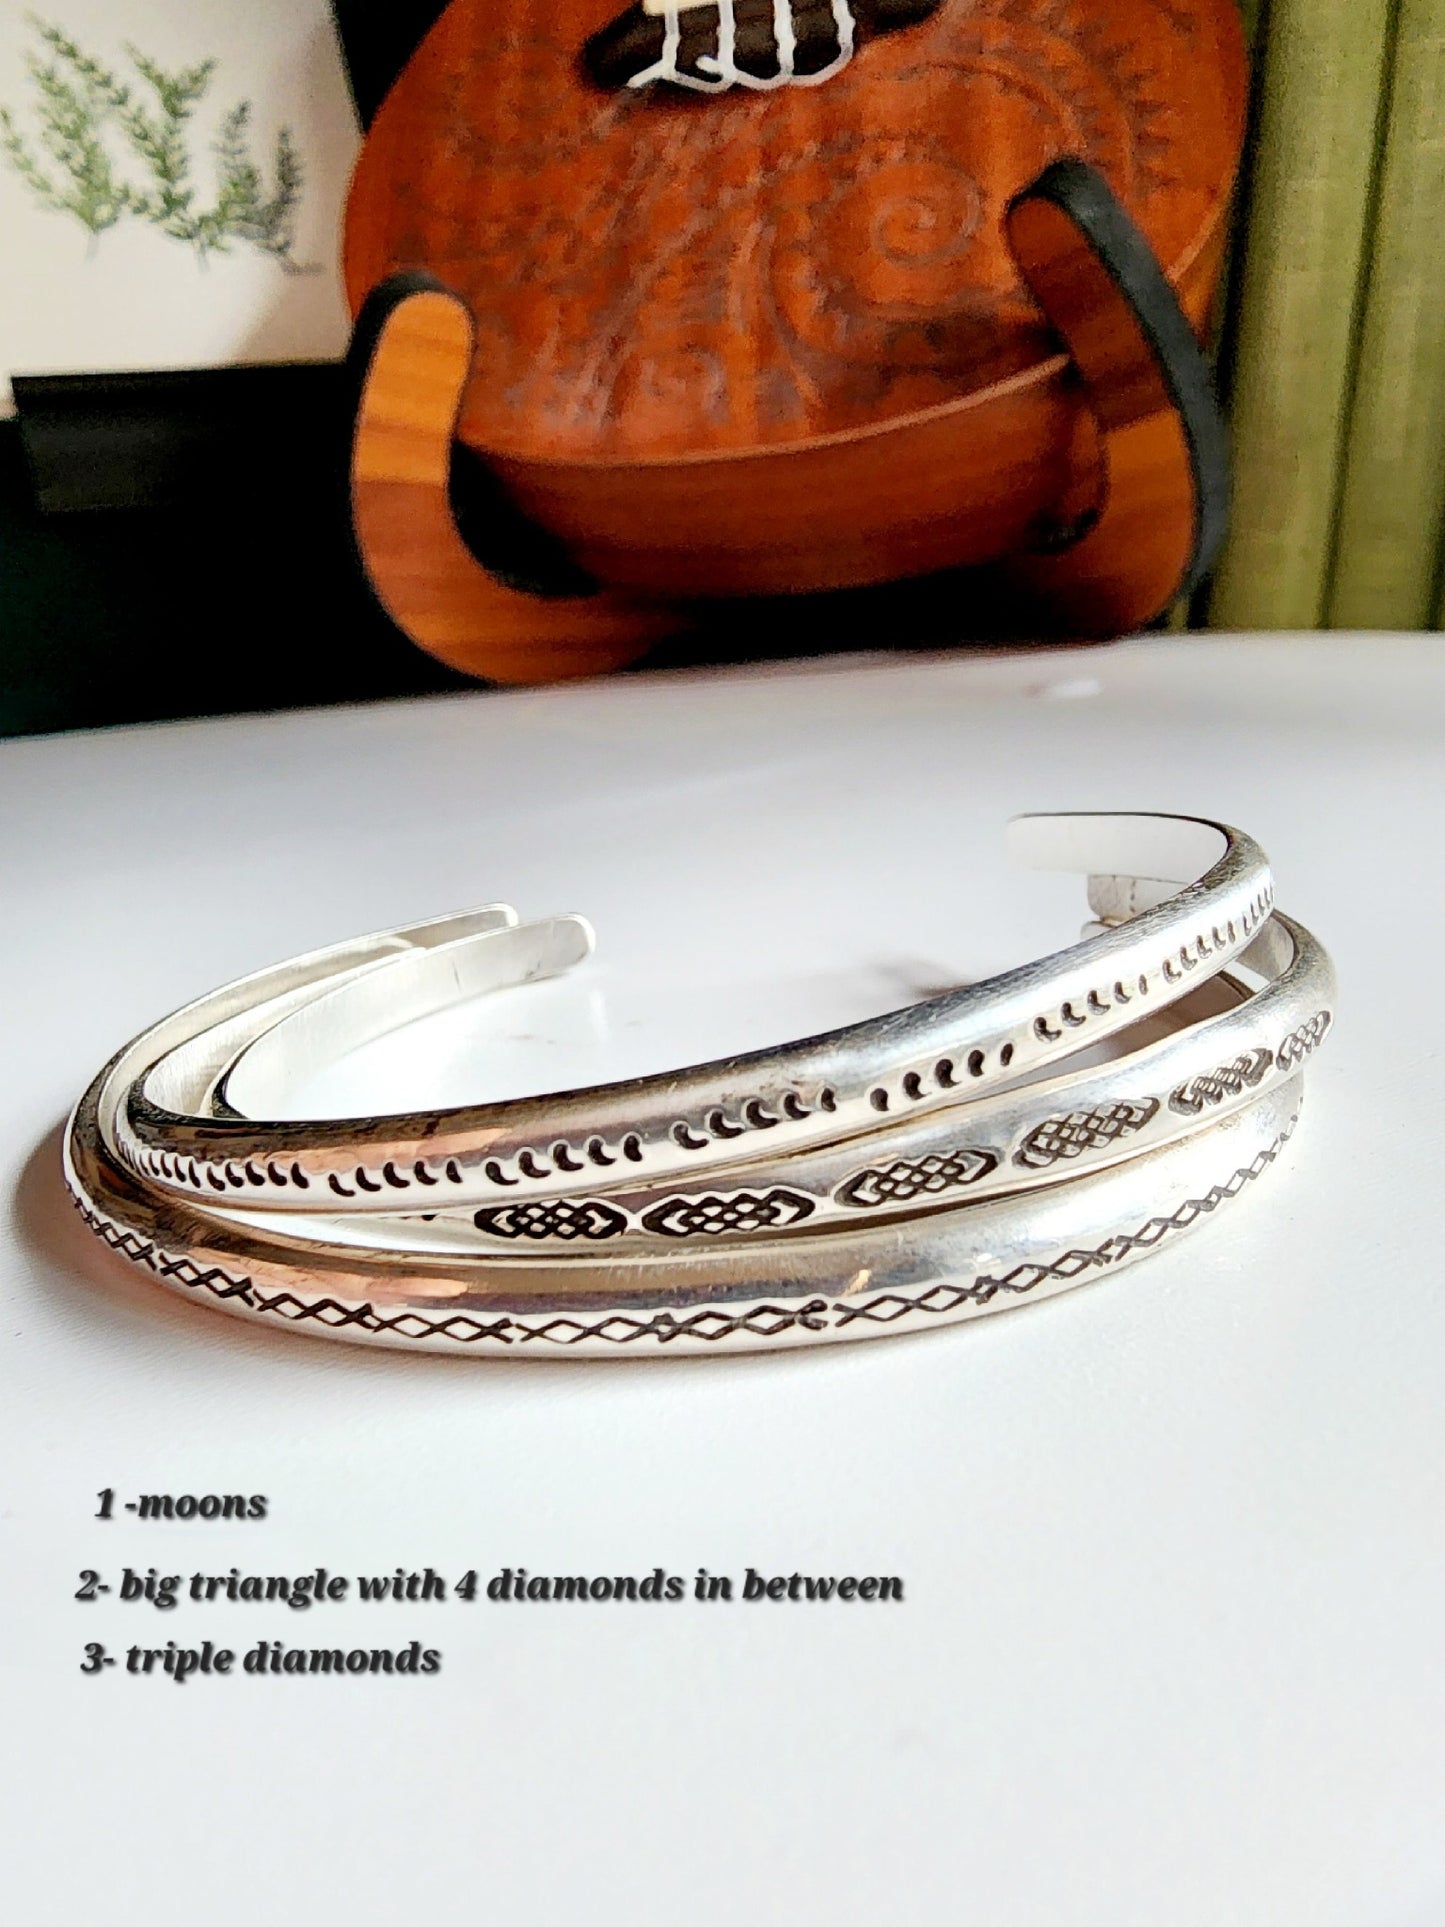 Stamped sterling silver cuff bracelet. Option one is a set of 5 small crescent moons, two is four interlocking triangles stamped continously, option 3 is four diamonds set right next to each other stamped continuously.